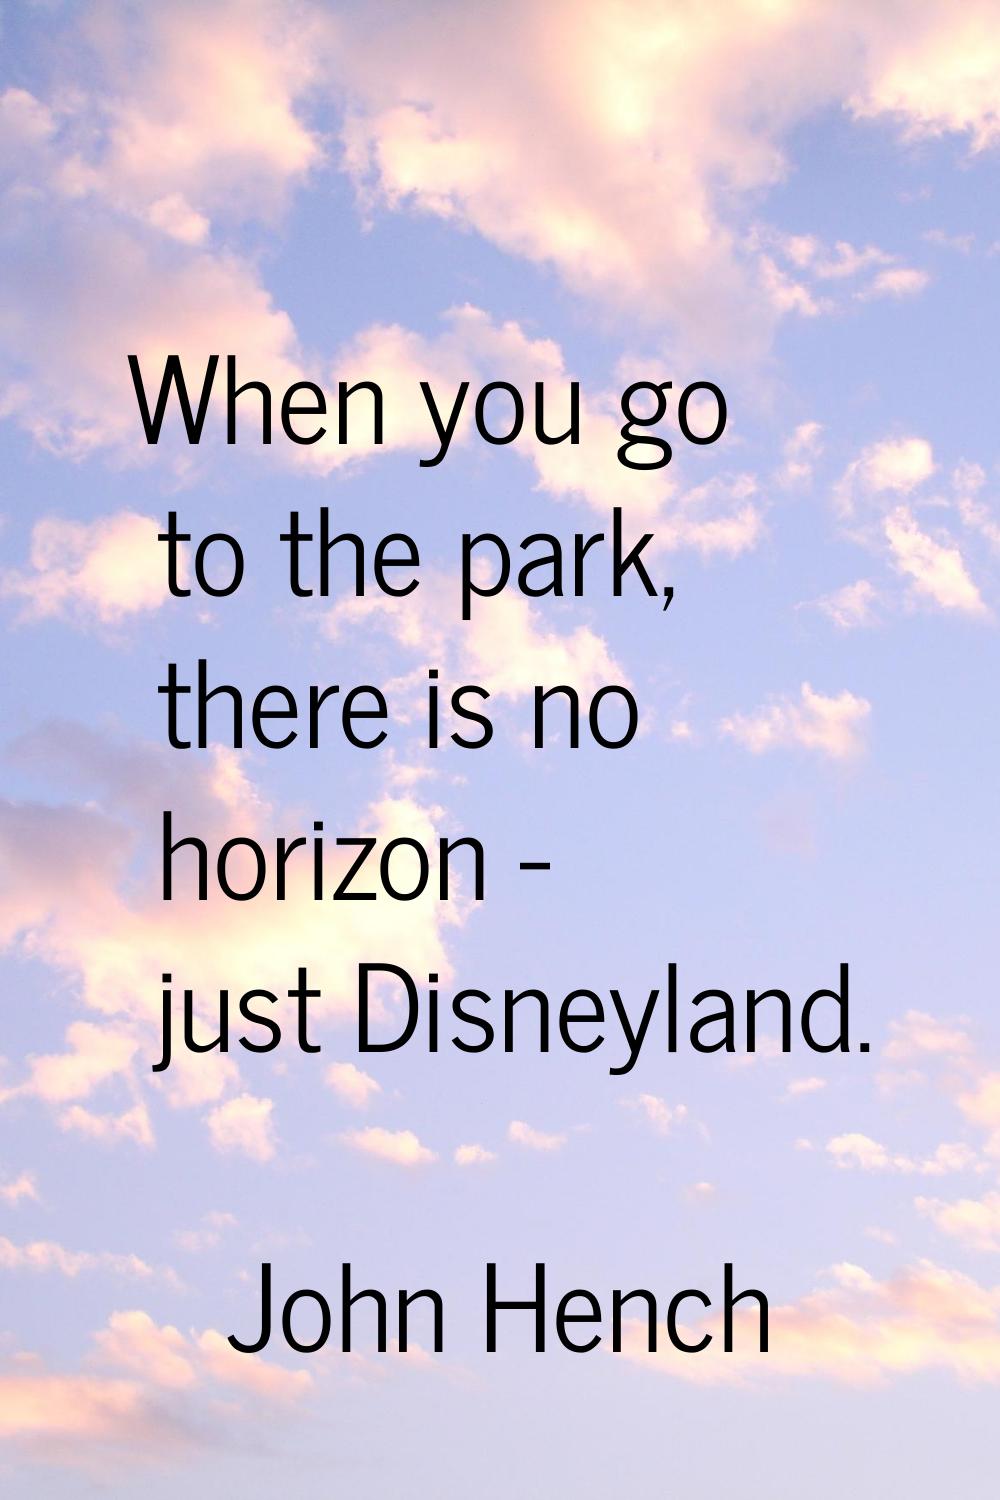 When you go to the park, there is no horizon - just Disneyland.